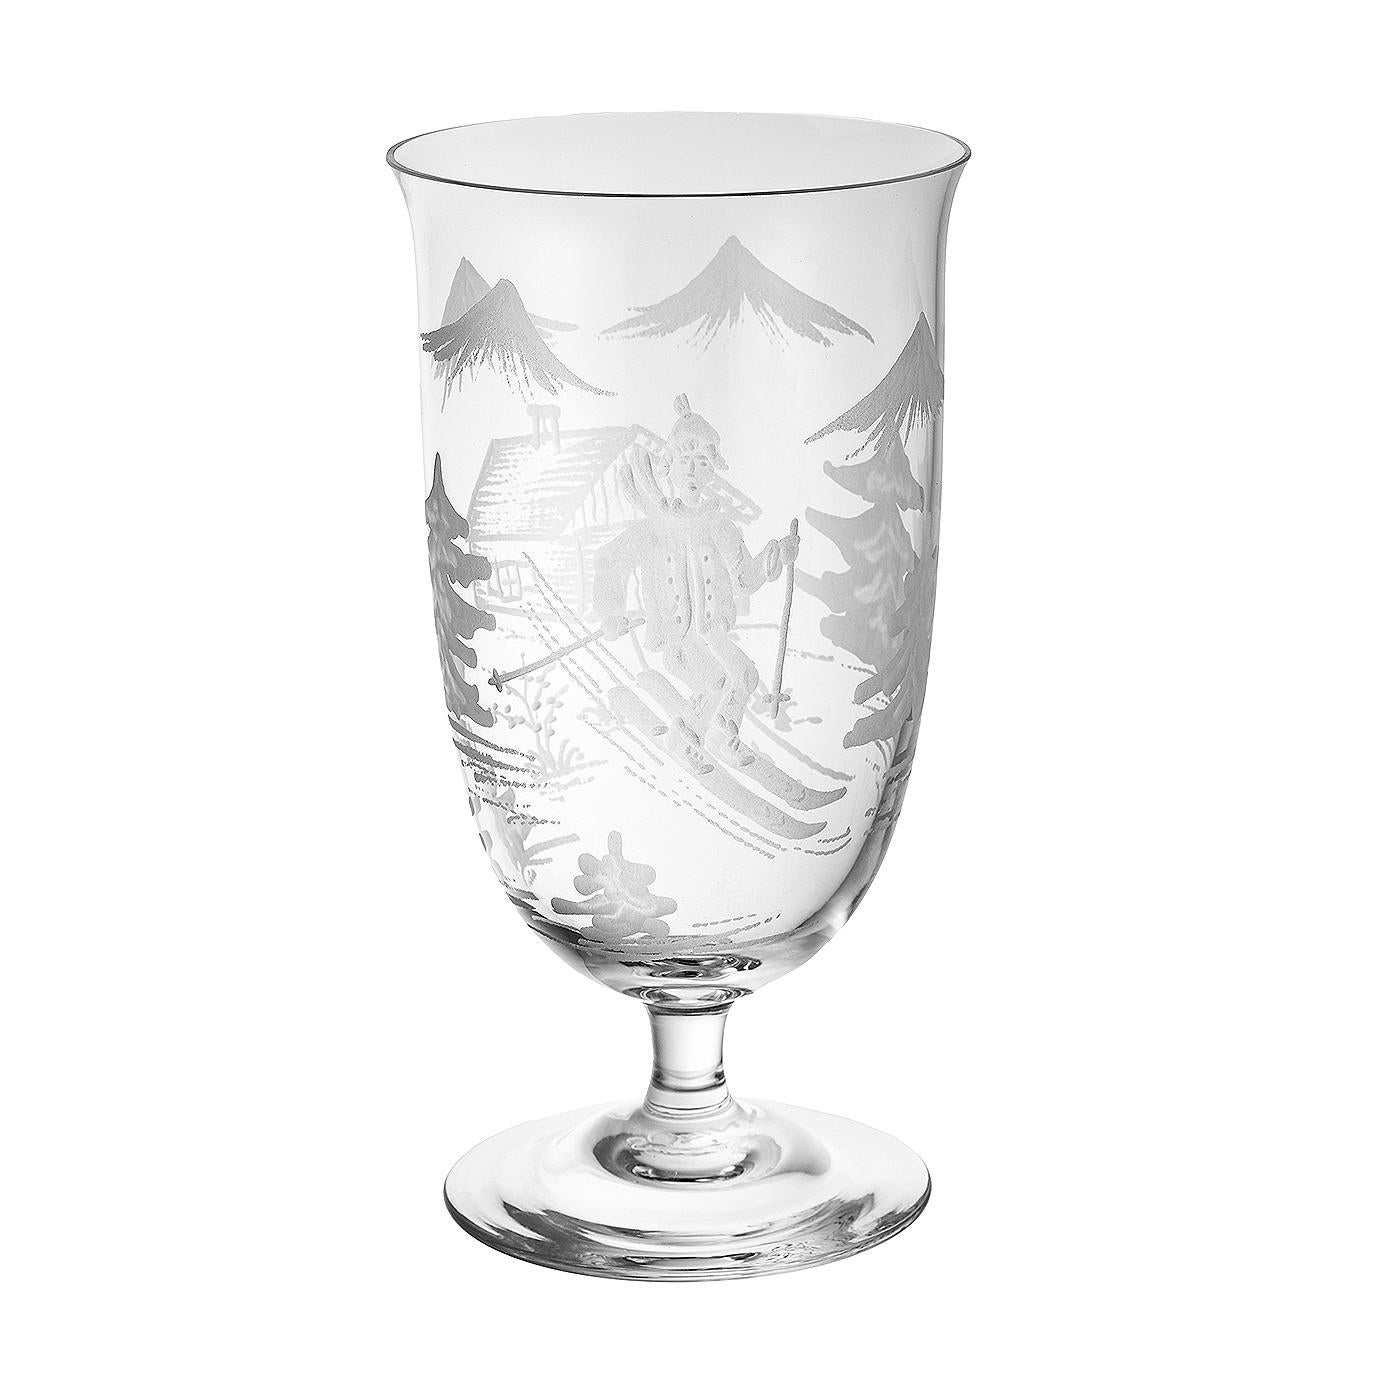 Set of six hand blown glasses in clear crystal with a hand-edged skier decor. The decor is a country style scene, showing a skier boy, trees and mountains and a chalet all-over the glass. A matching crystal carafe can be ordered in addition.